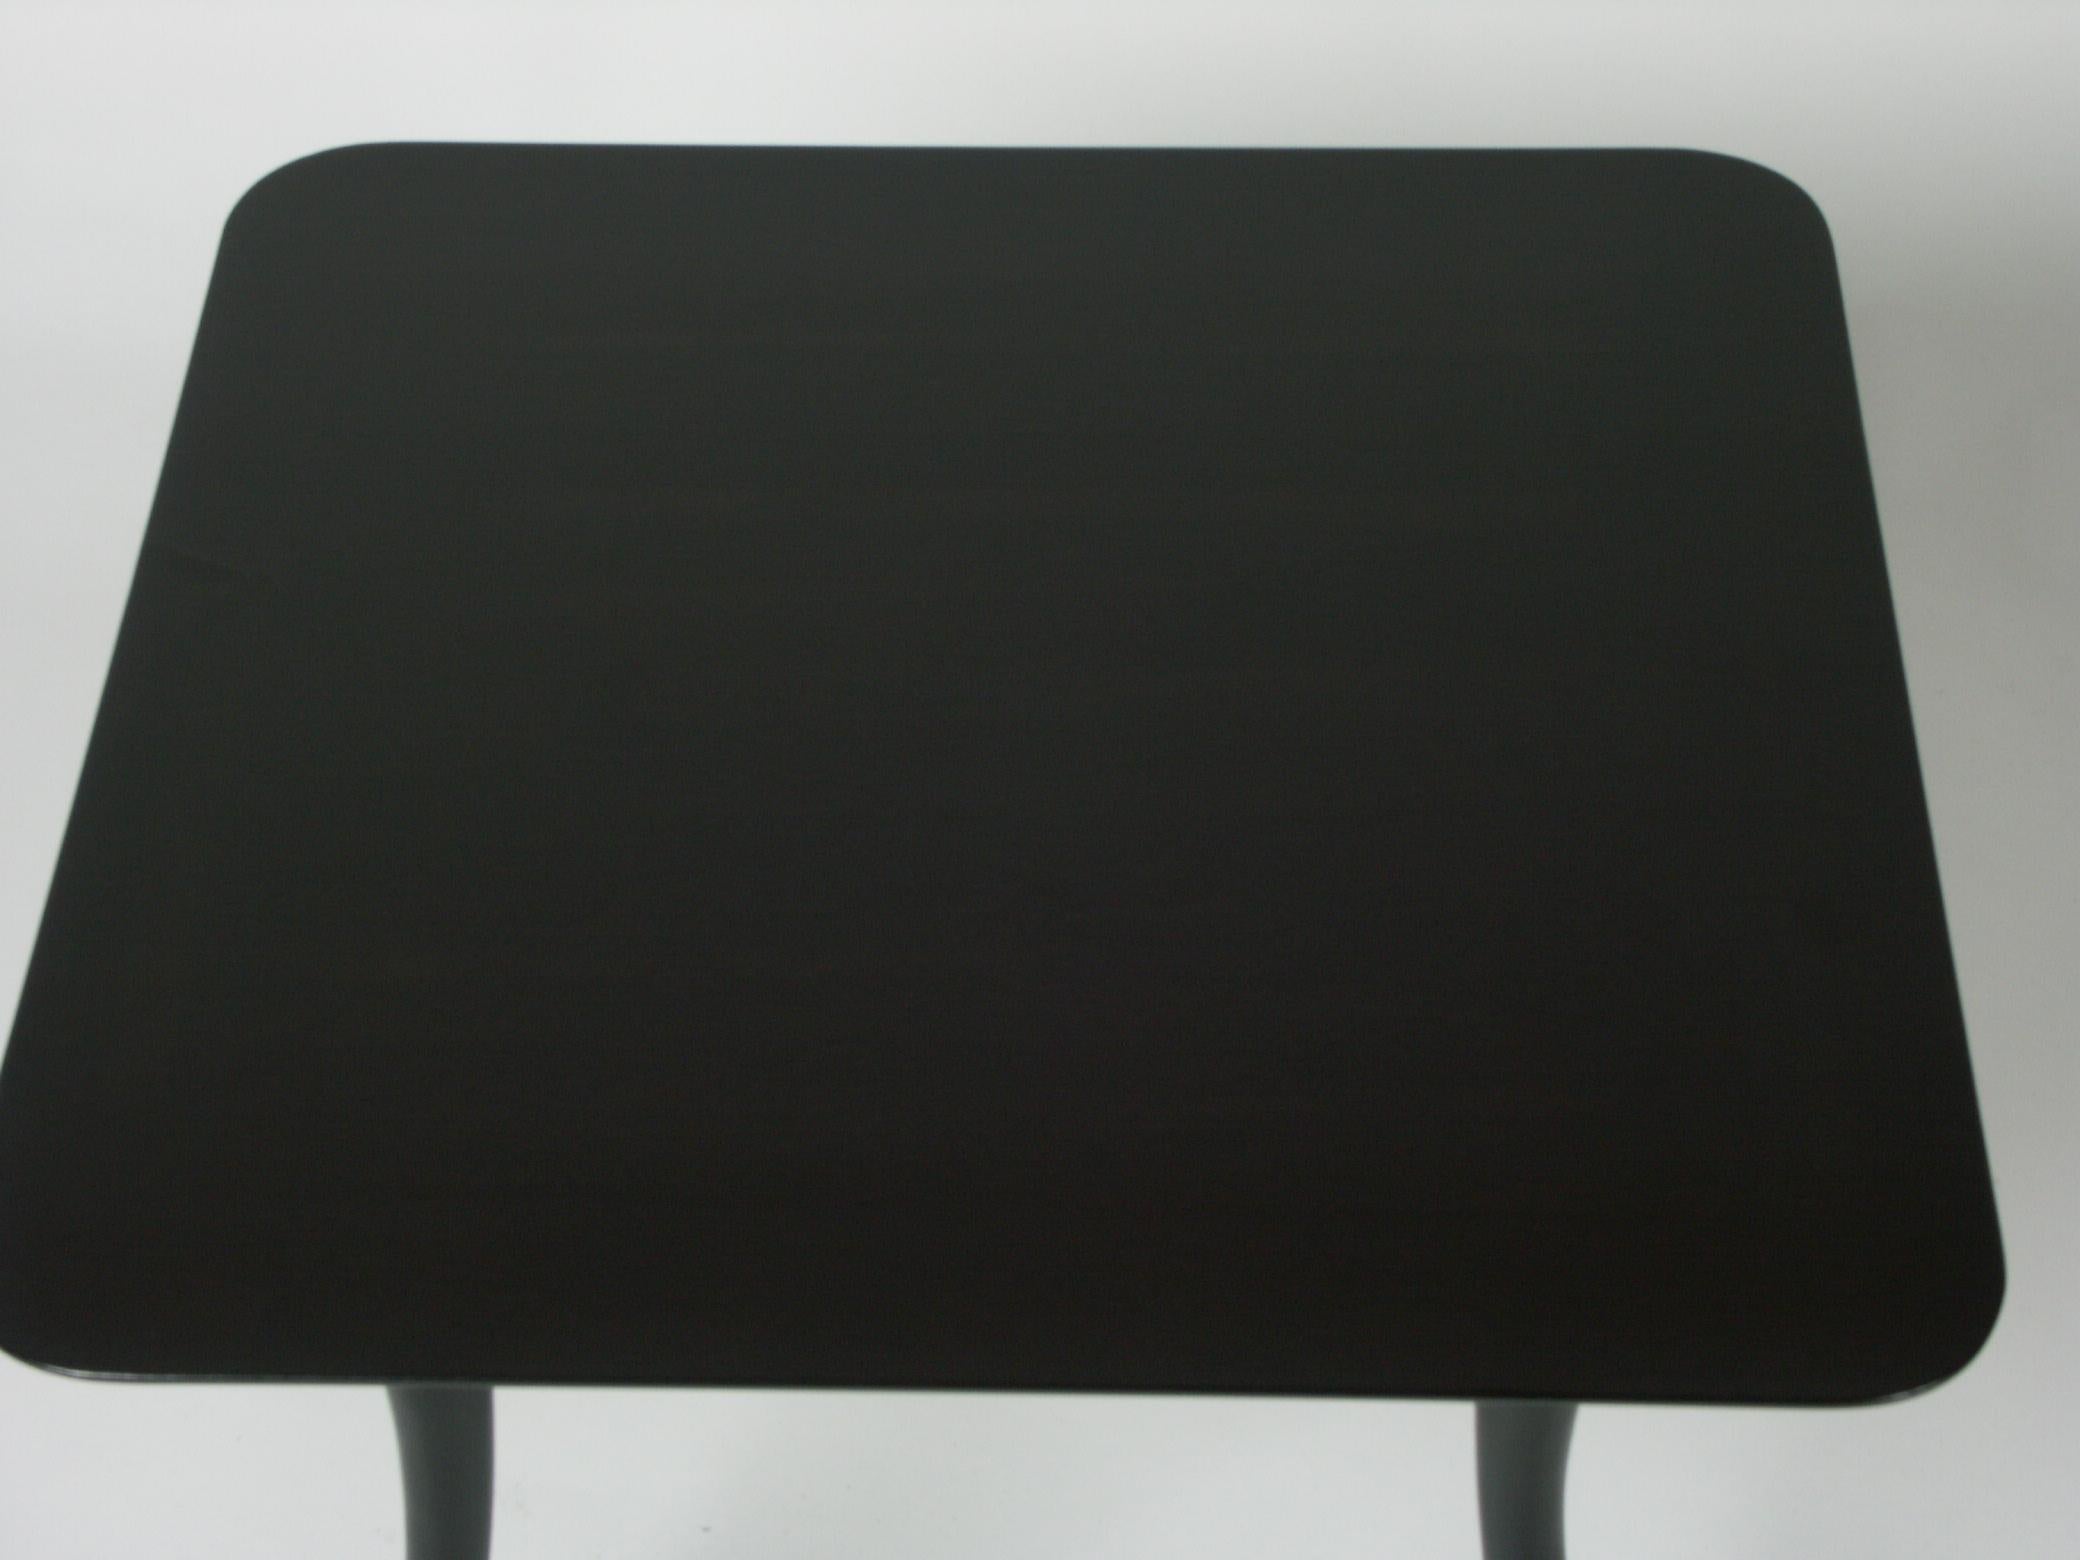 Mid-Century Modern T. H. Robsjohn-Gibbings End Table with Splayed Legs - Ebony Finish  For Sale